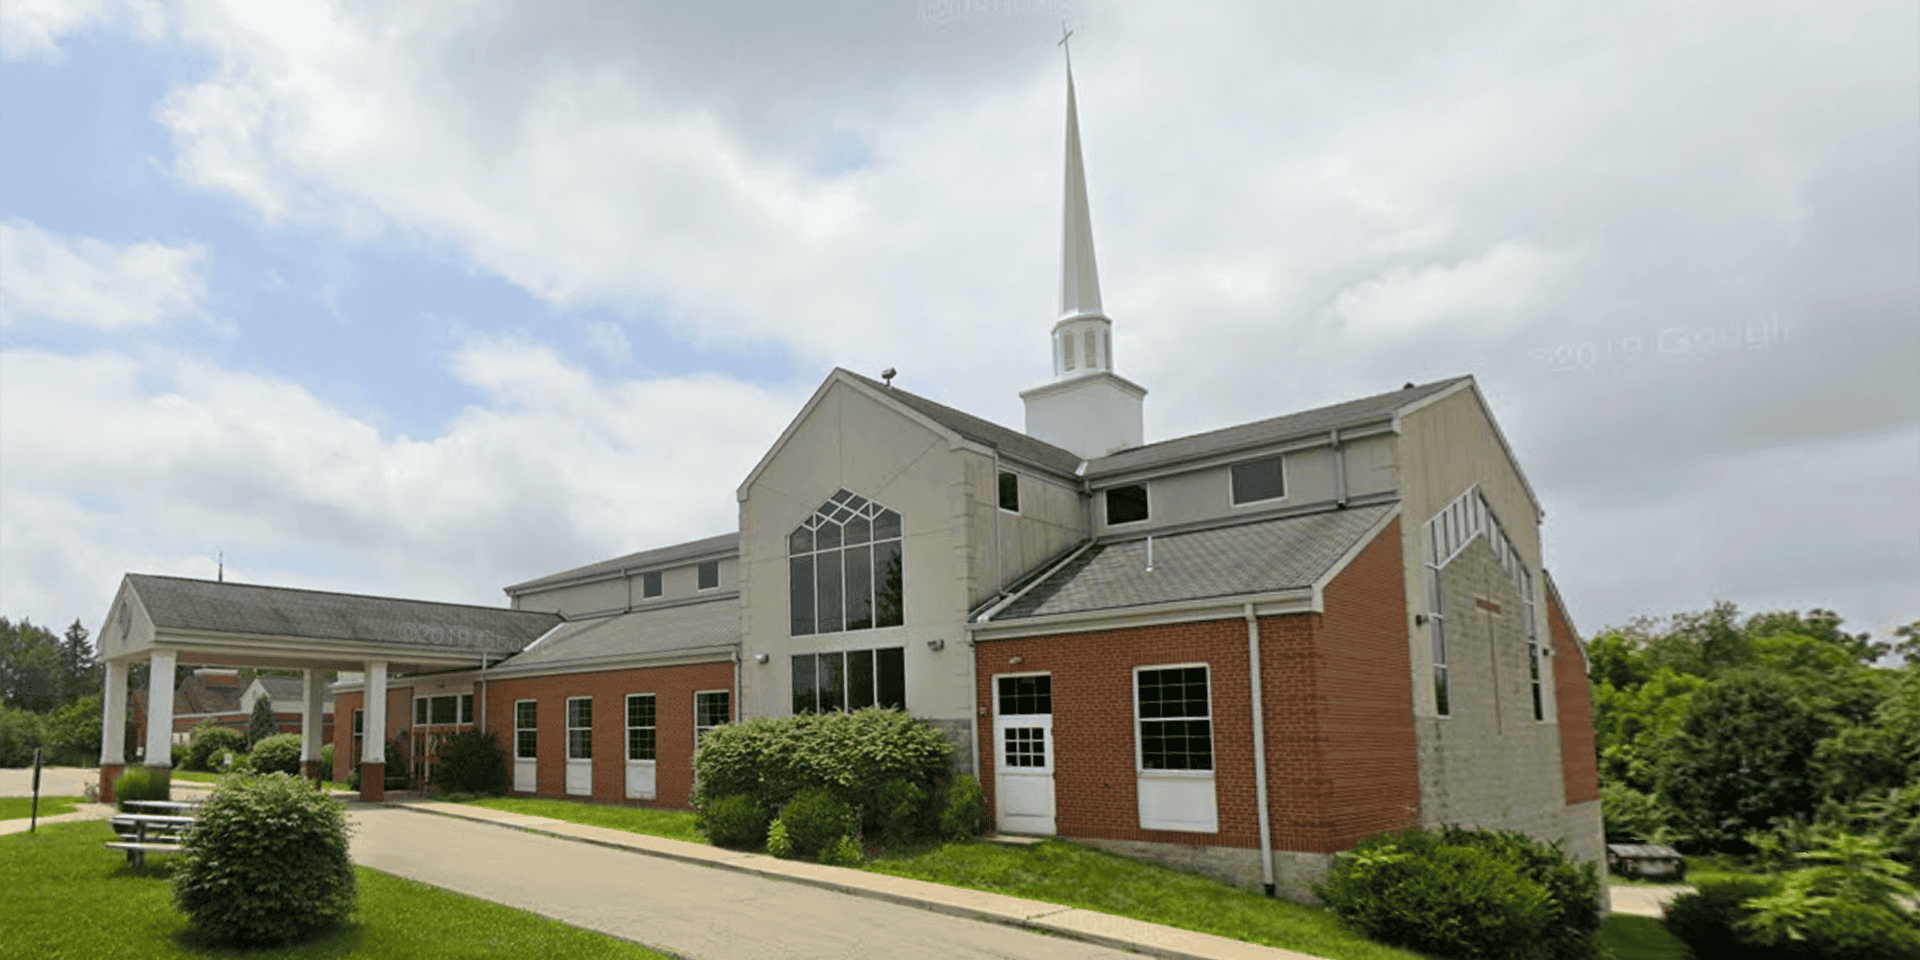 North Way Christian Community - South Campus, a non-denominational church in the south hills of Pittsburgh